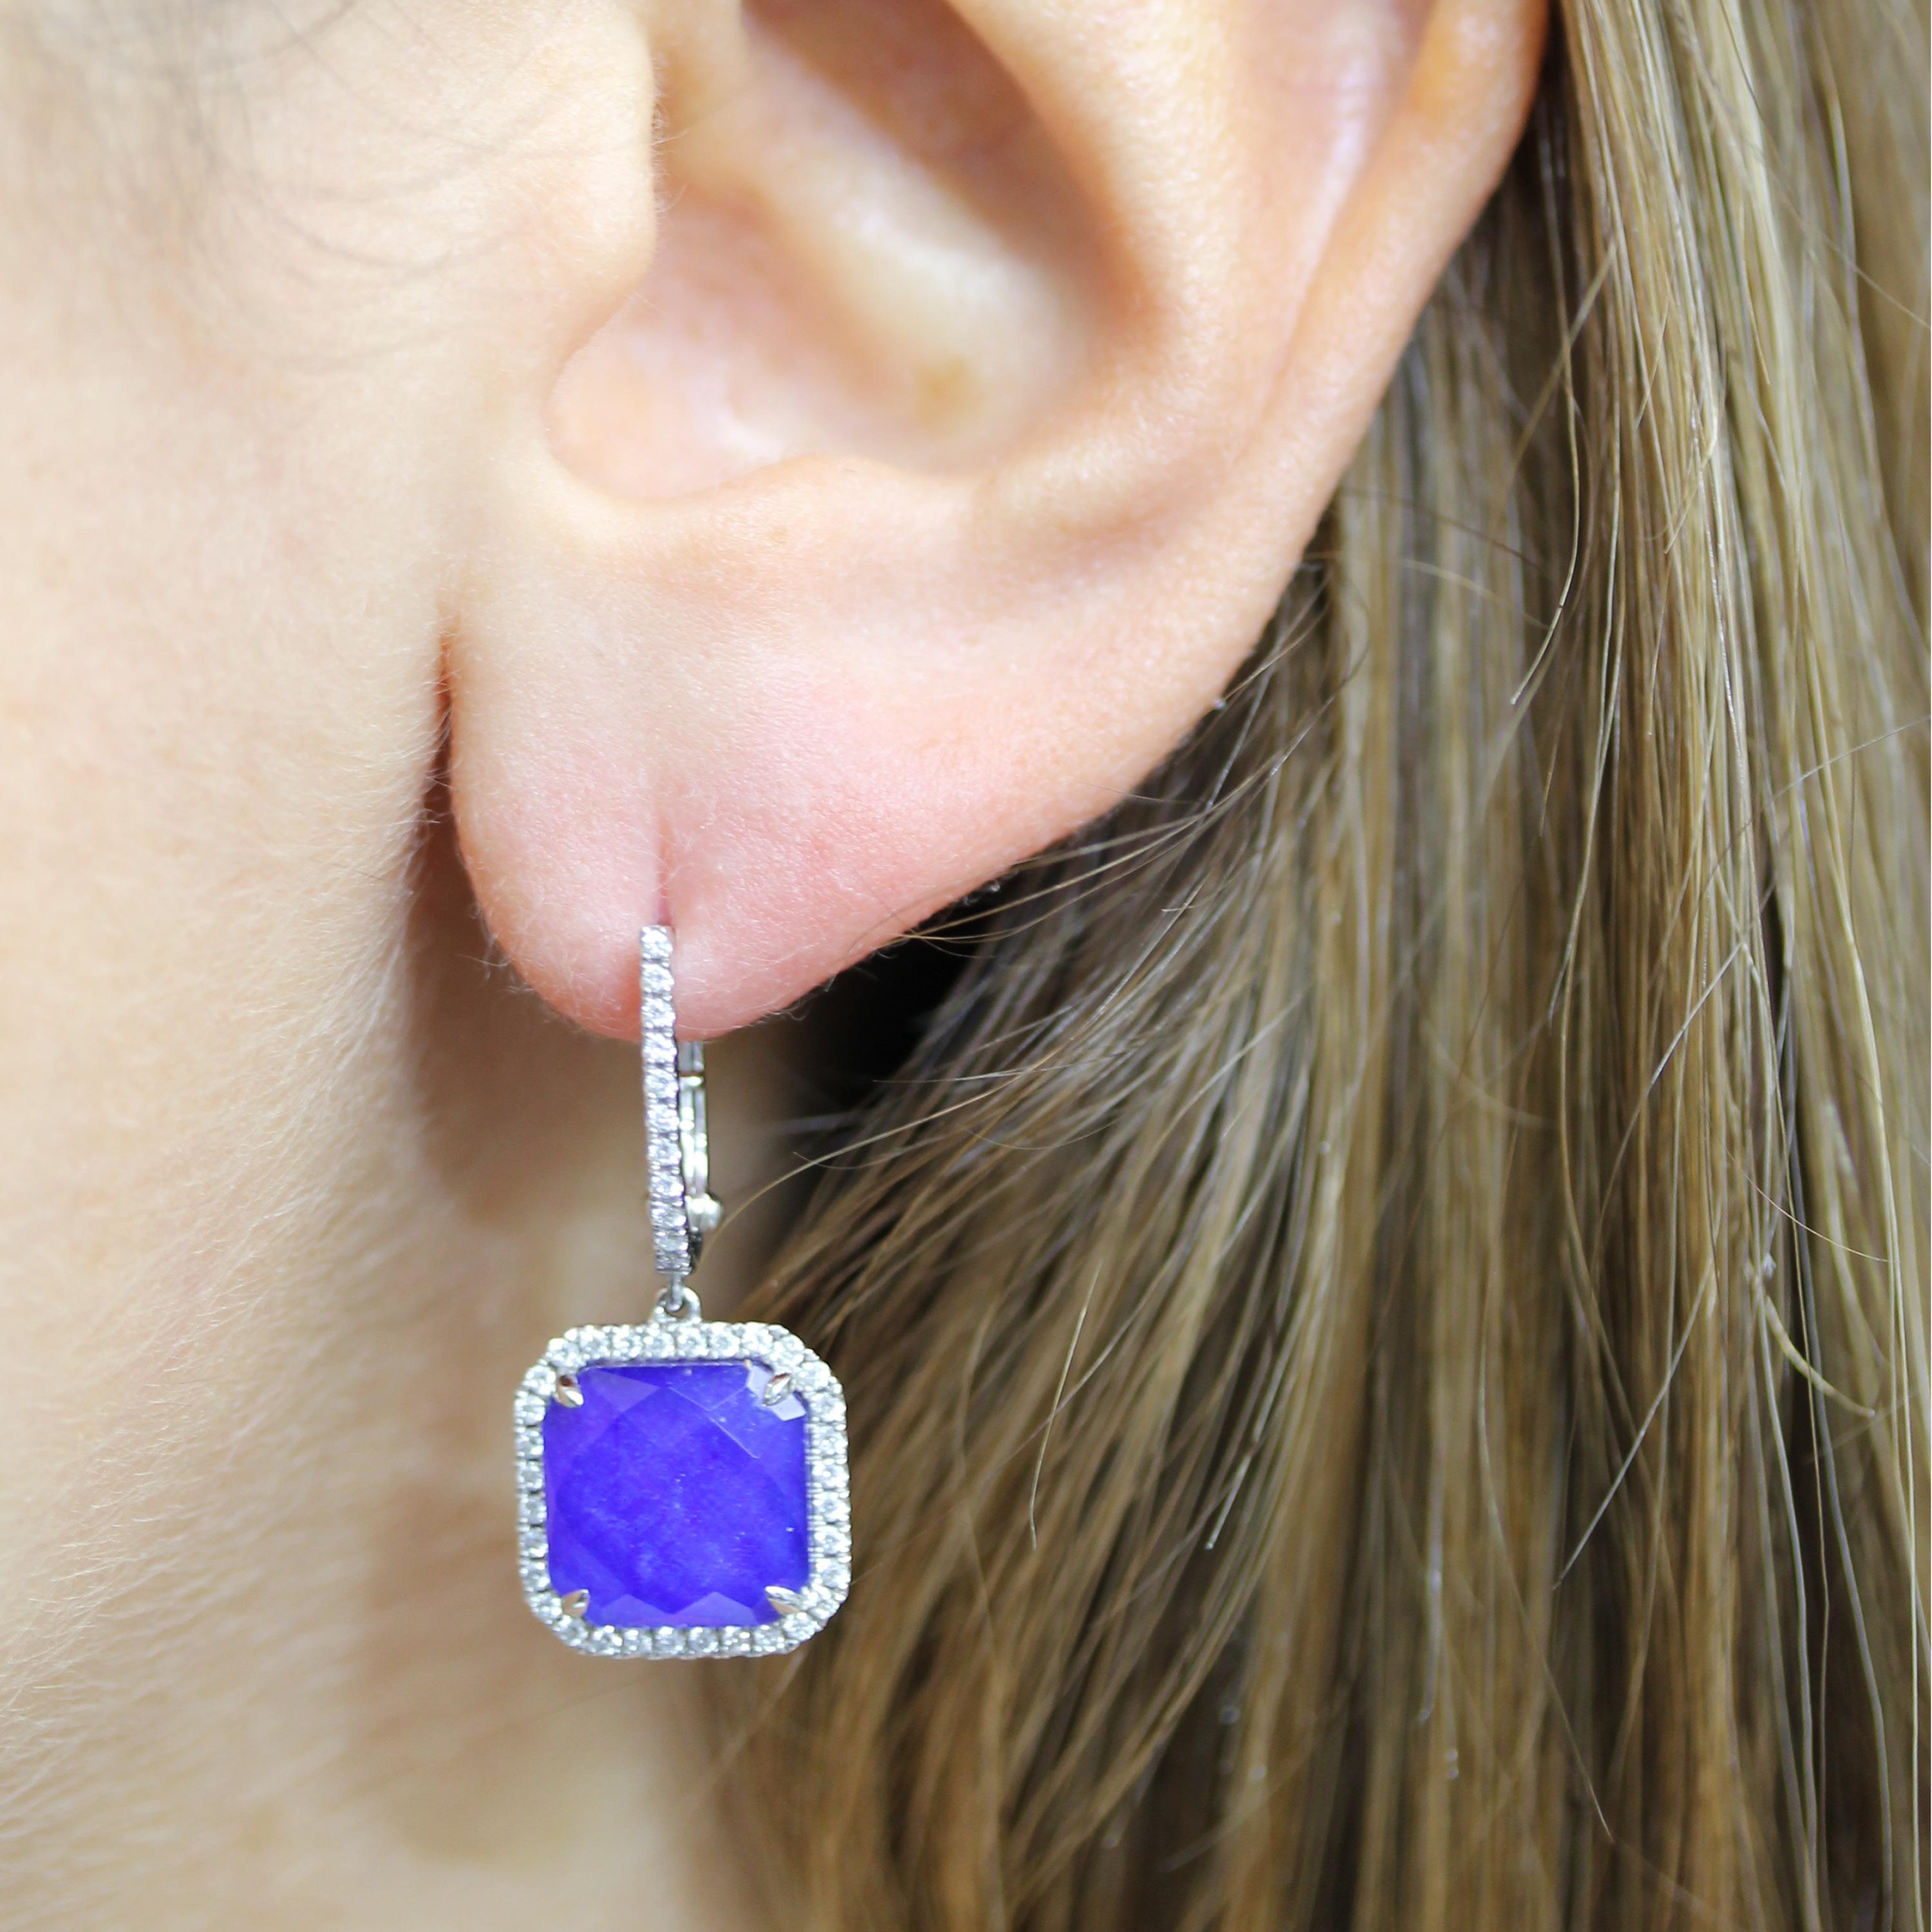 Royal Lapis Dangle Earrings featuring square, checker-cut, White Quartz layered with Natural Lapis Lazuli, surrounded by a diamond halo, set in 18K white gold. Earrings hang from diamond huggie tops. The Royal Lapis collection from Doves by Doron